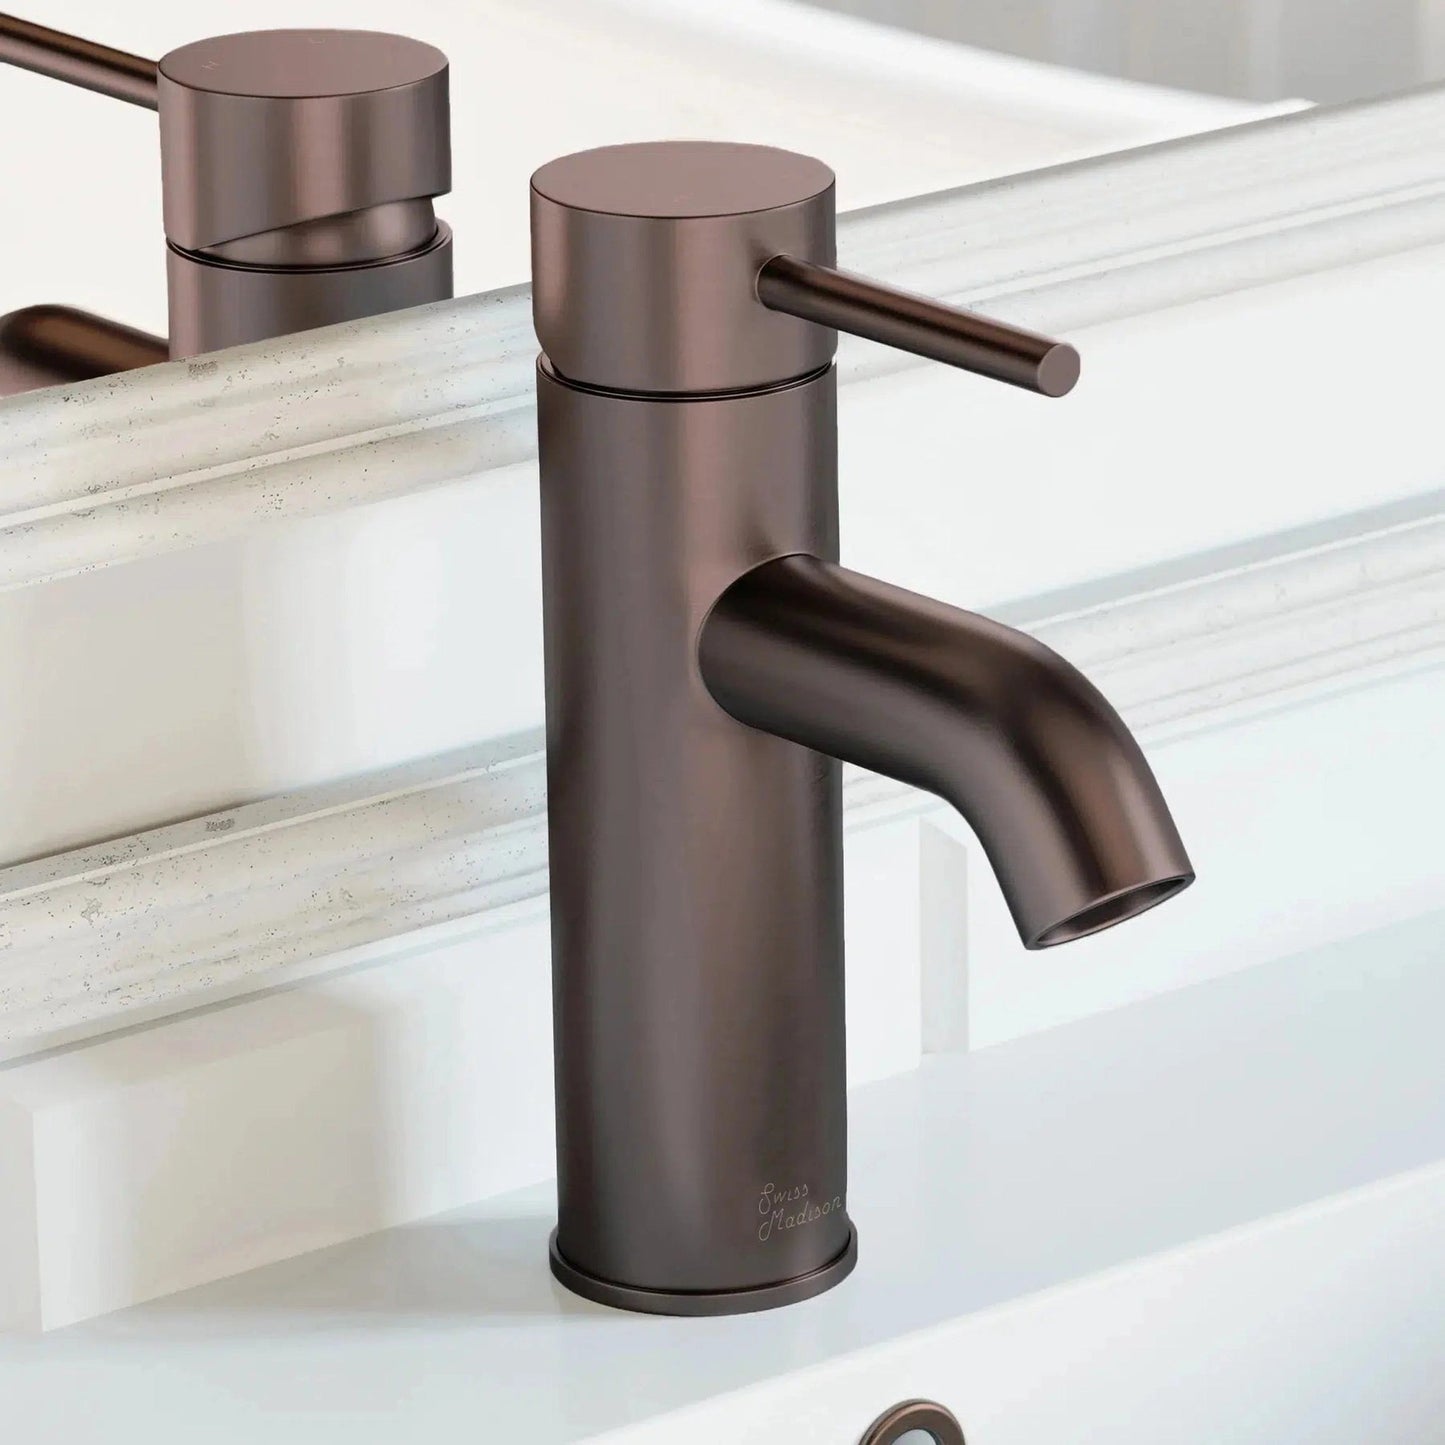 Swiss Madison Ivy 8" Single-Handle Oil Rubbed Bronze Bathroom Faucet With 1.2 GPM Flow Rate